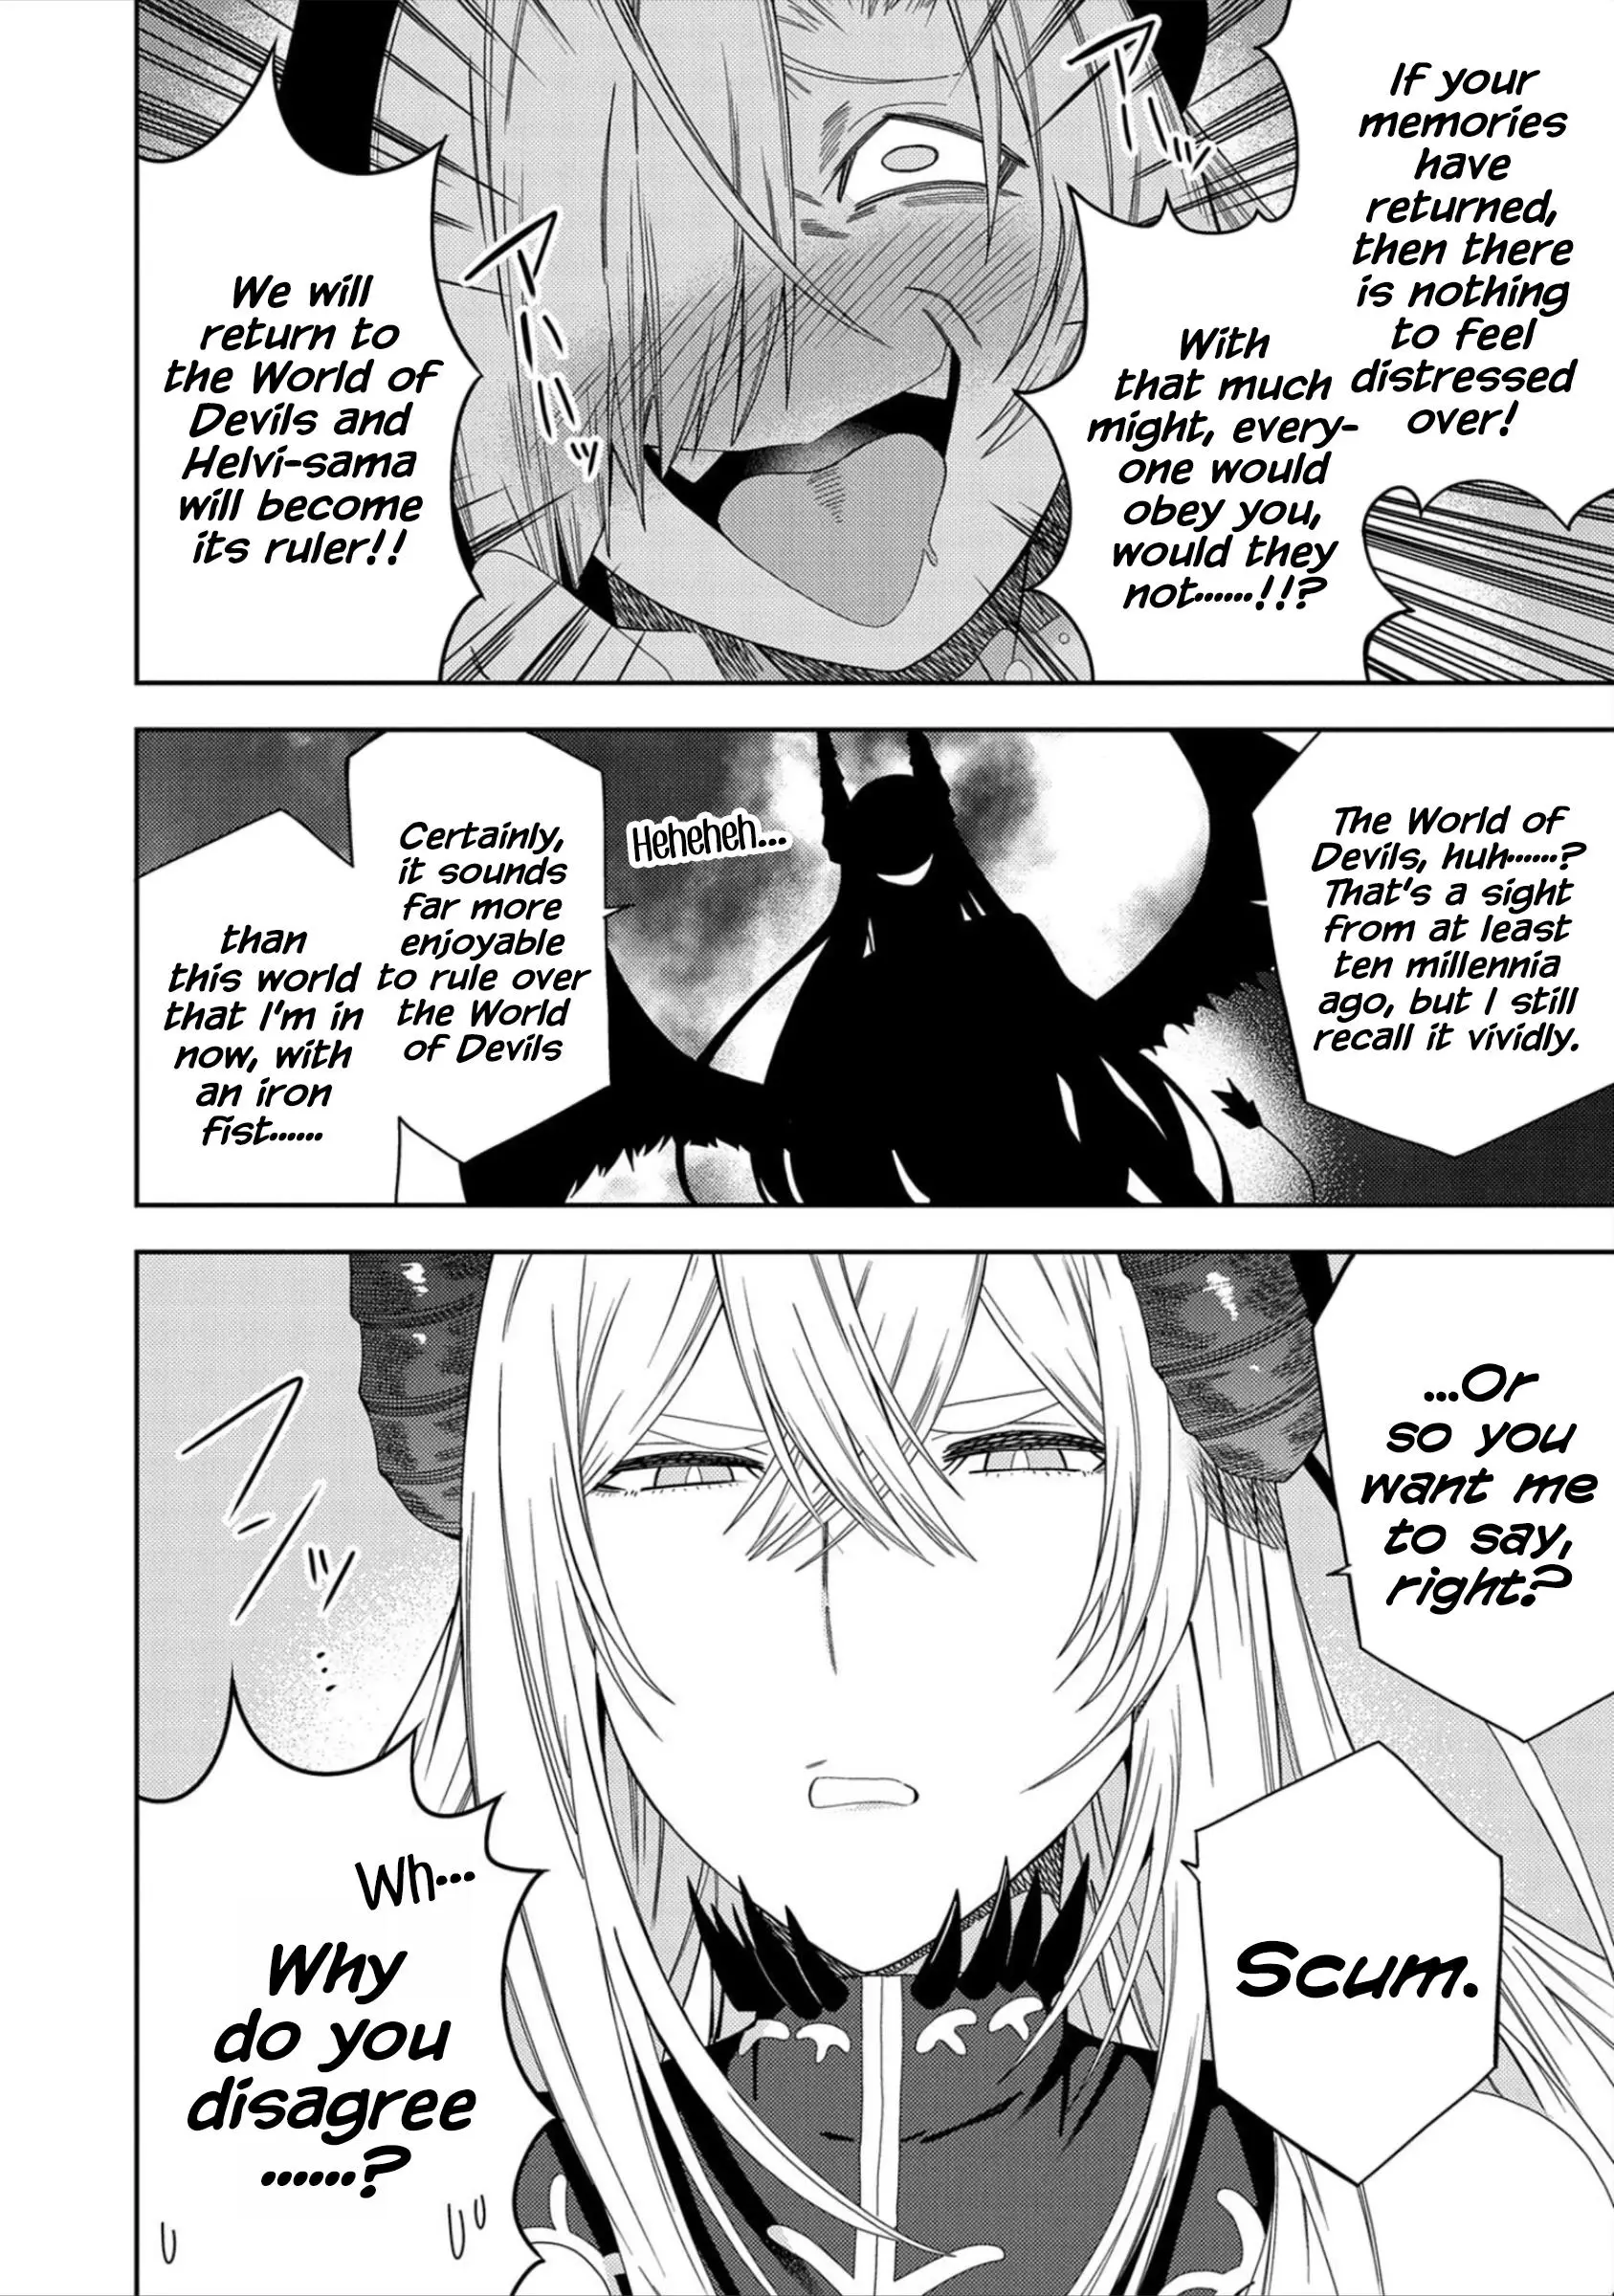 I Summoned The Devil To Grant Me A Wish, But I Married Her Instead Since She Was Adorable ~My New Devil Wife~ - 29 page 11-1a01b923